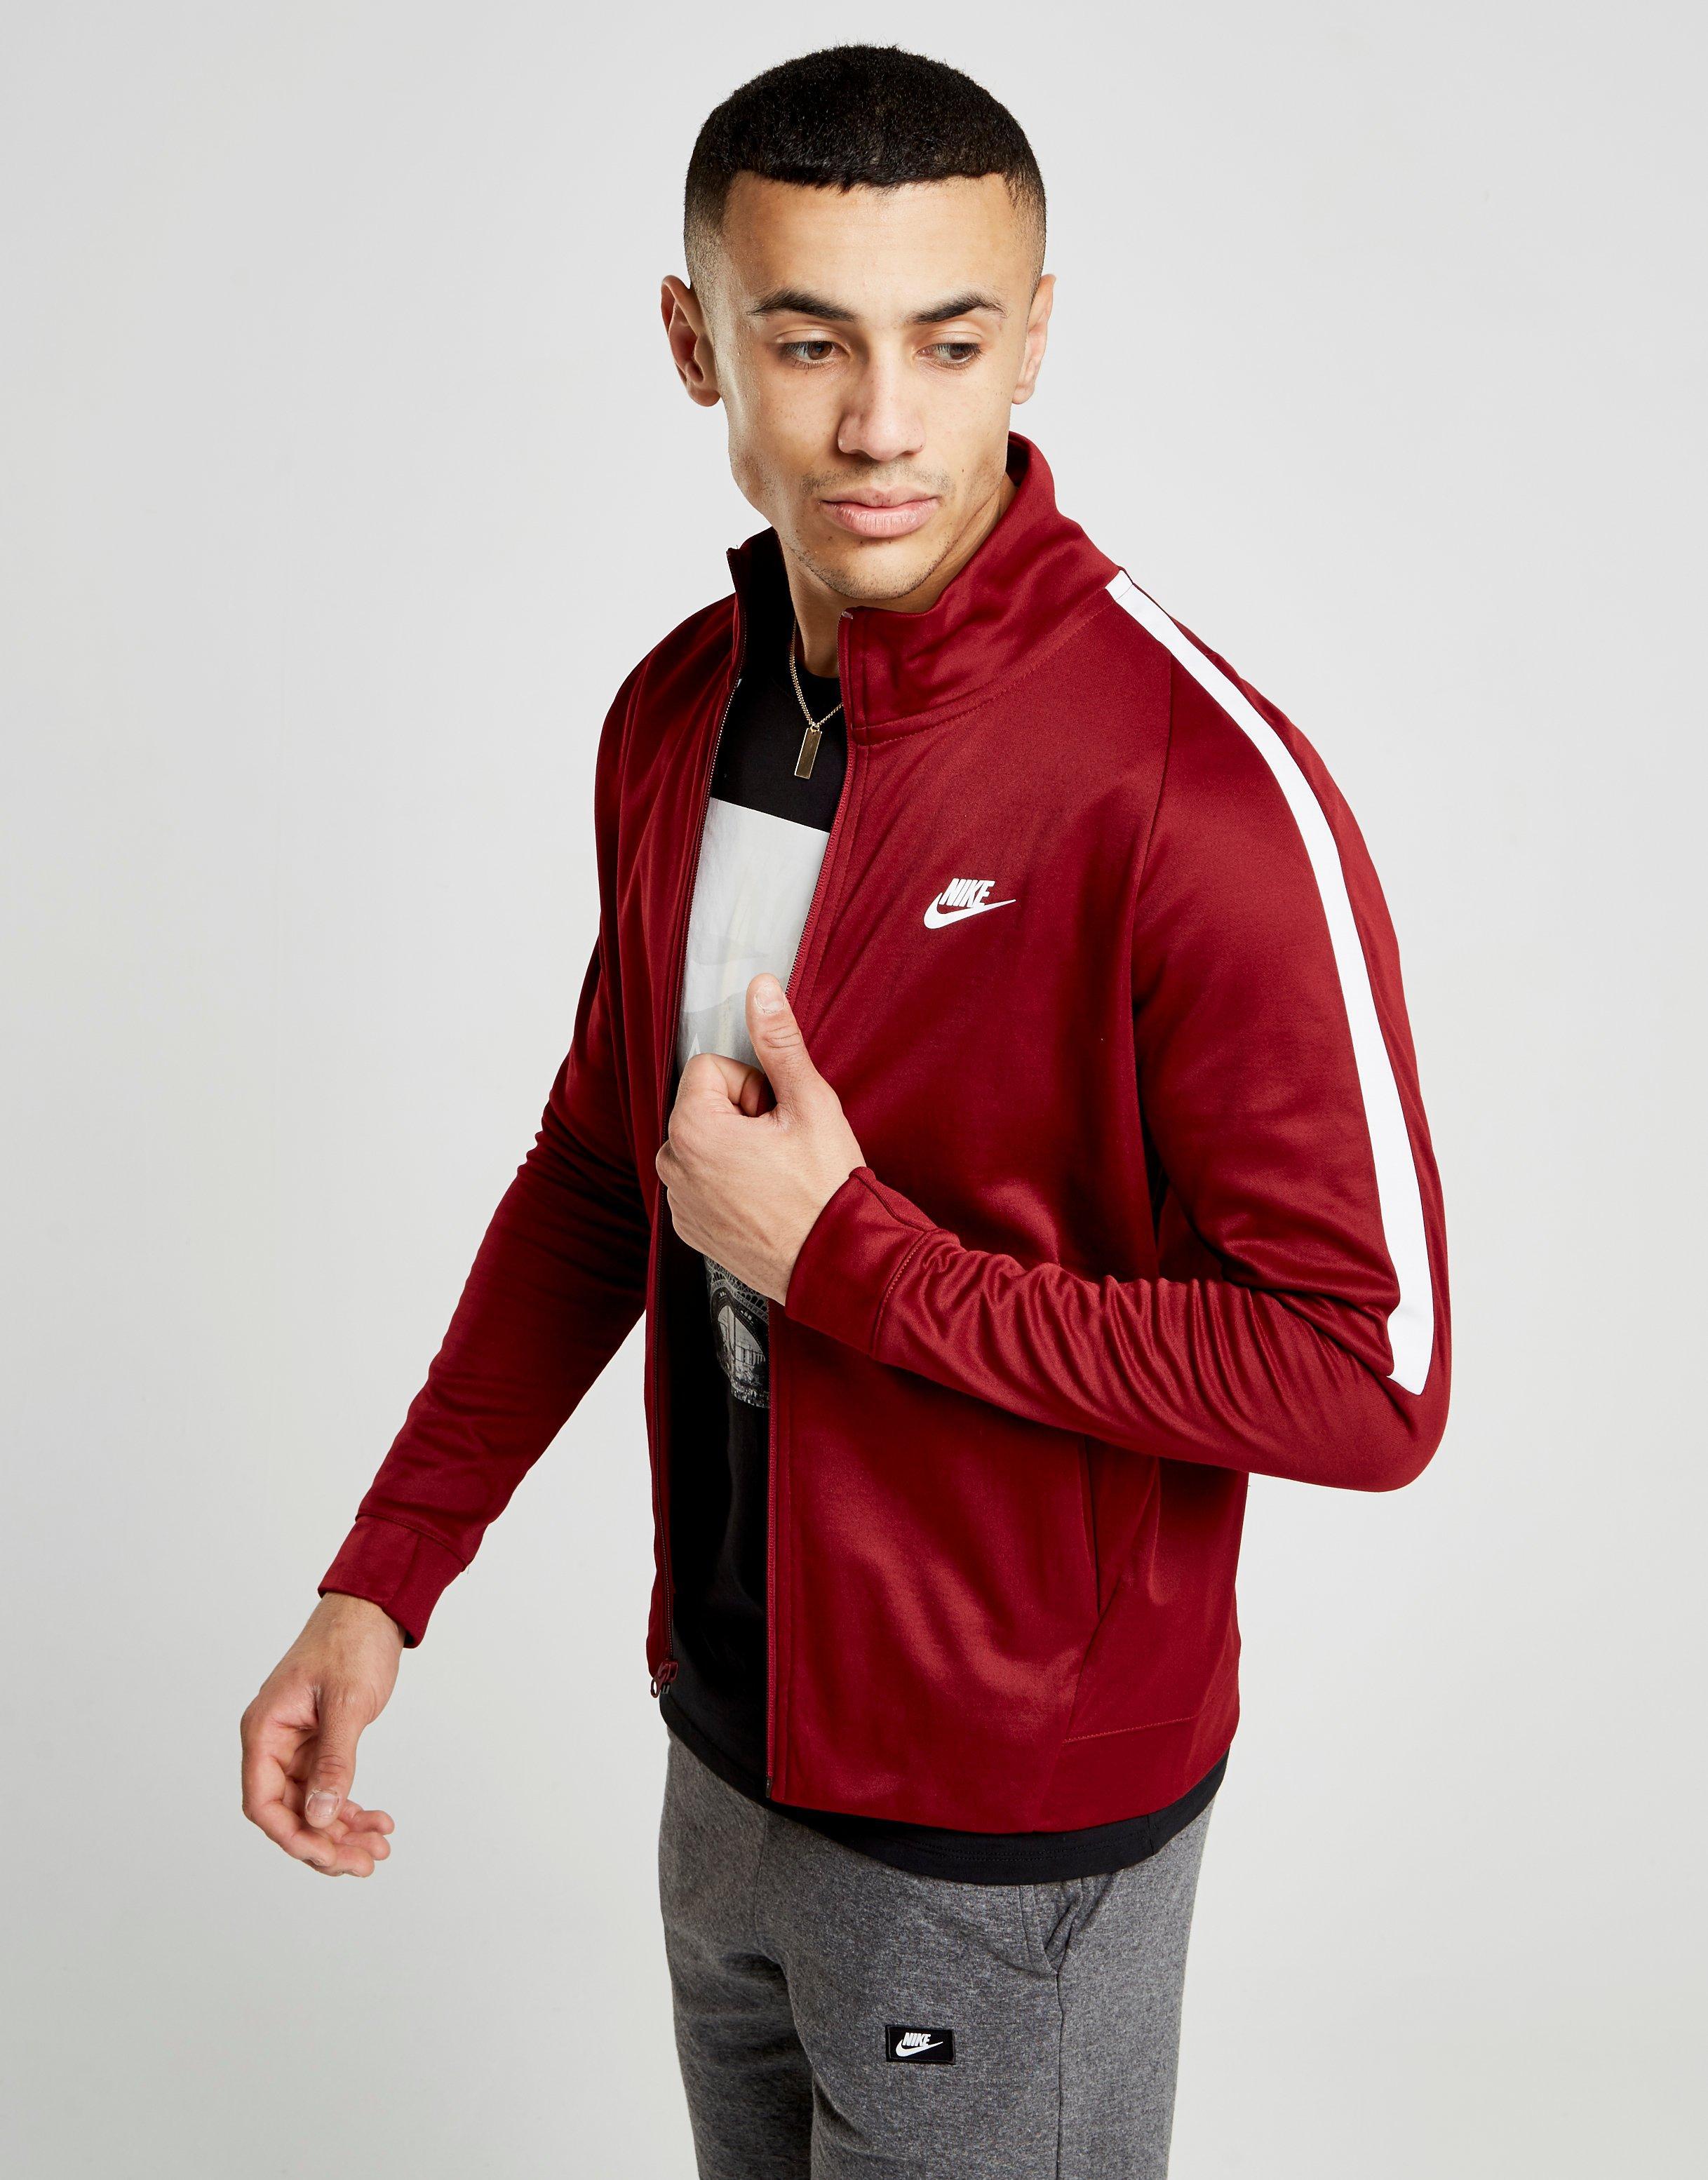 Nike Synthetic Tribute Track Top in 